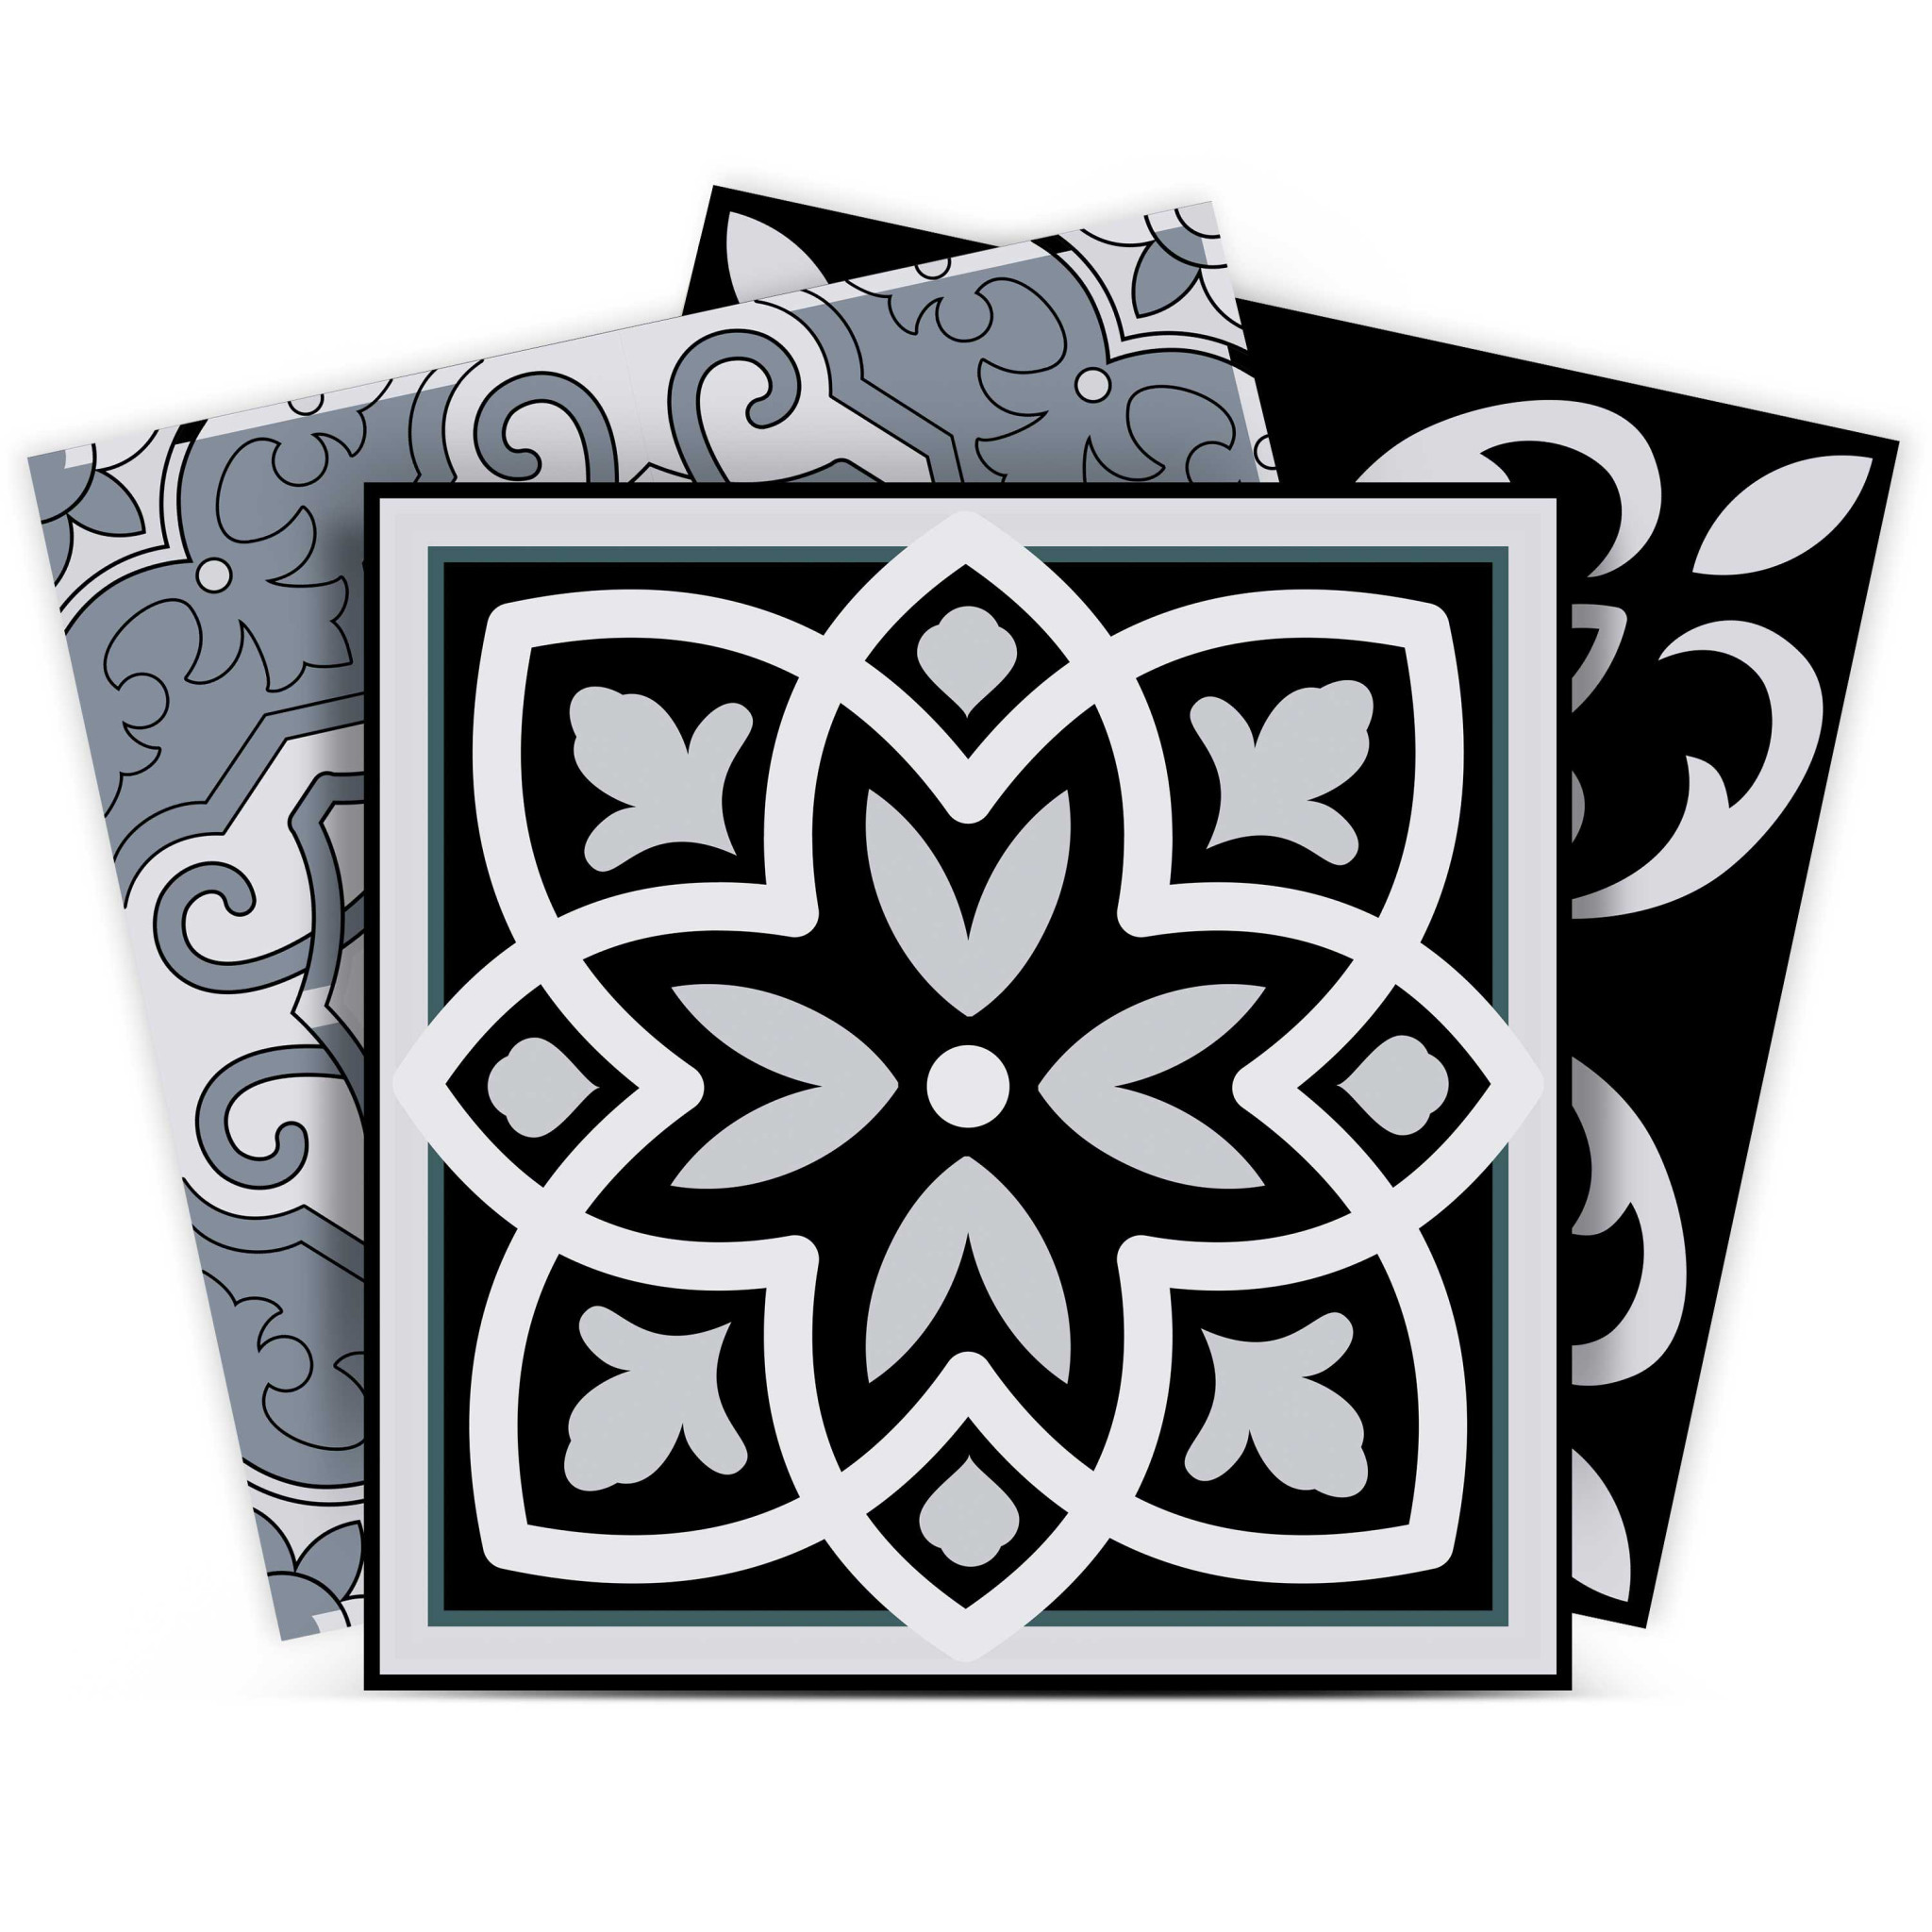 7" X 7" Black White and Gray Mosaic Peel and Stick Tiles-399873-1